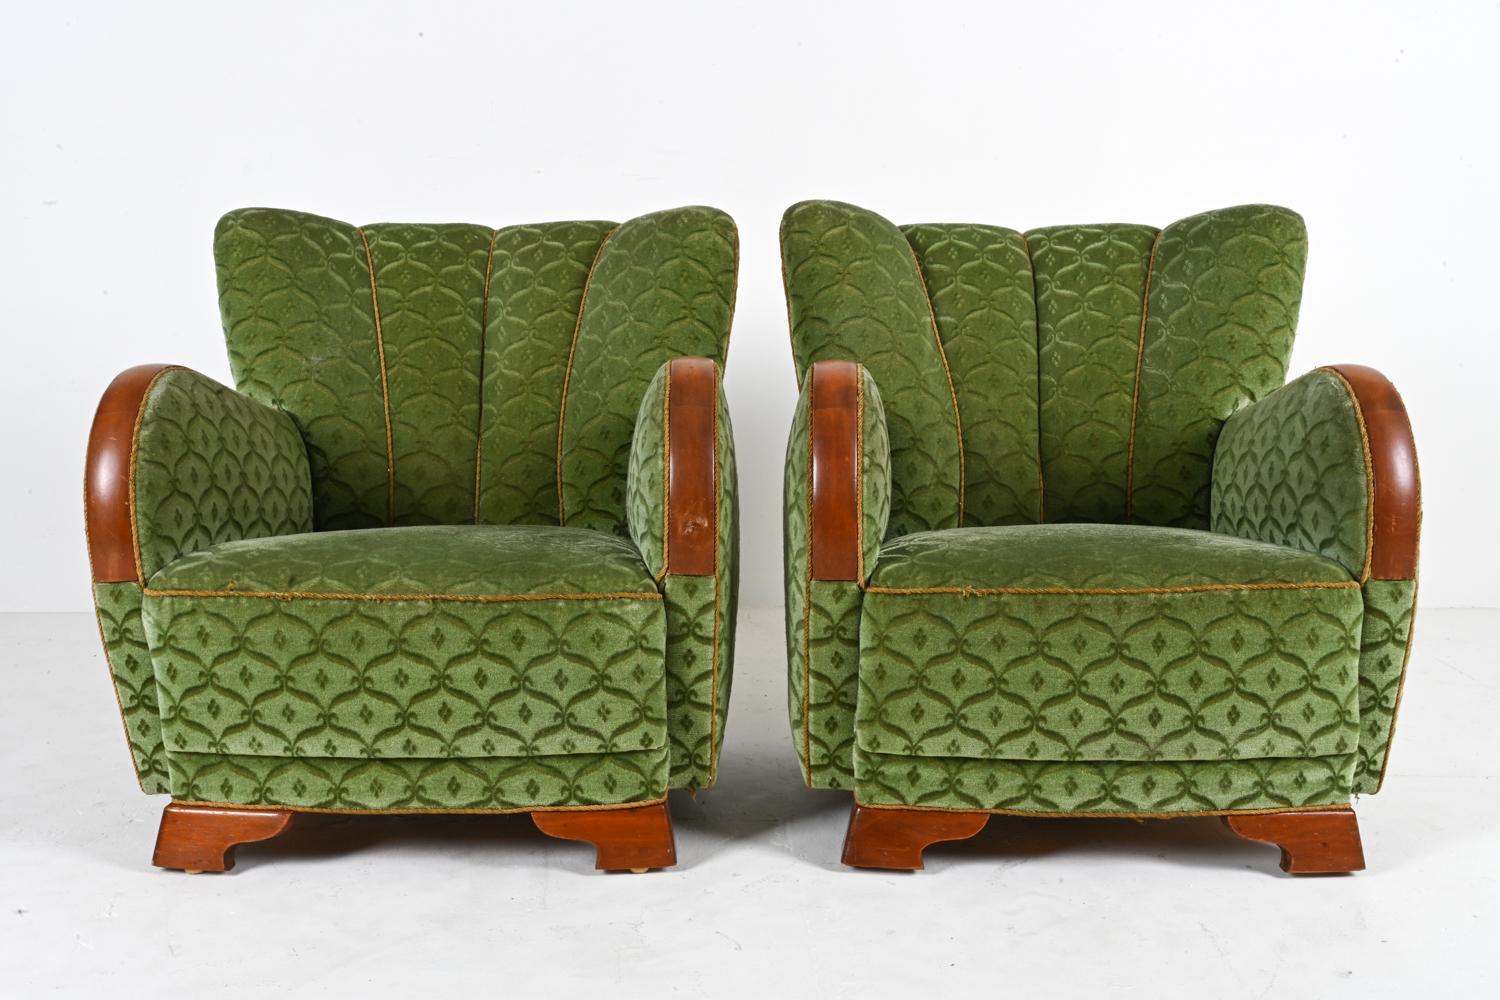 Mid-20th Century Pair of Mogens Lassen Style Danish Midcentury Lounge or Club Chairs, 1940s For Sale